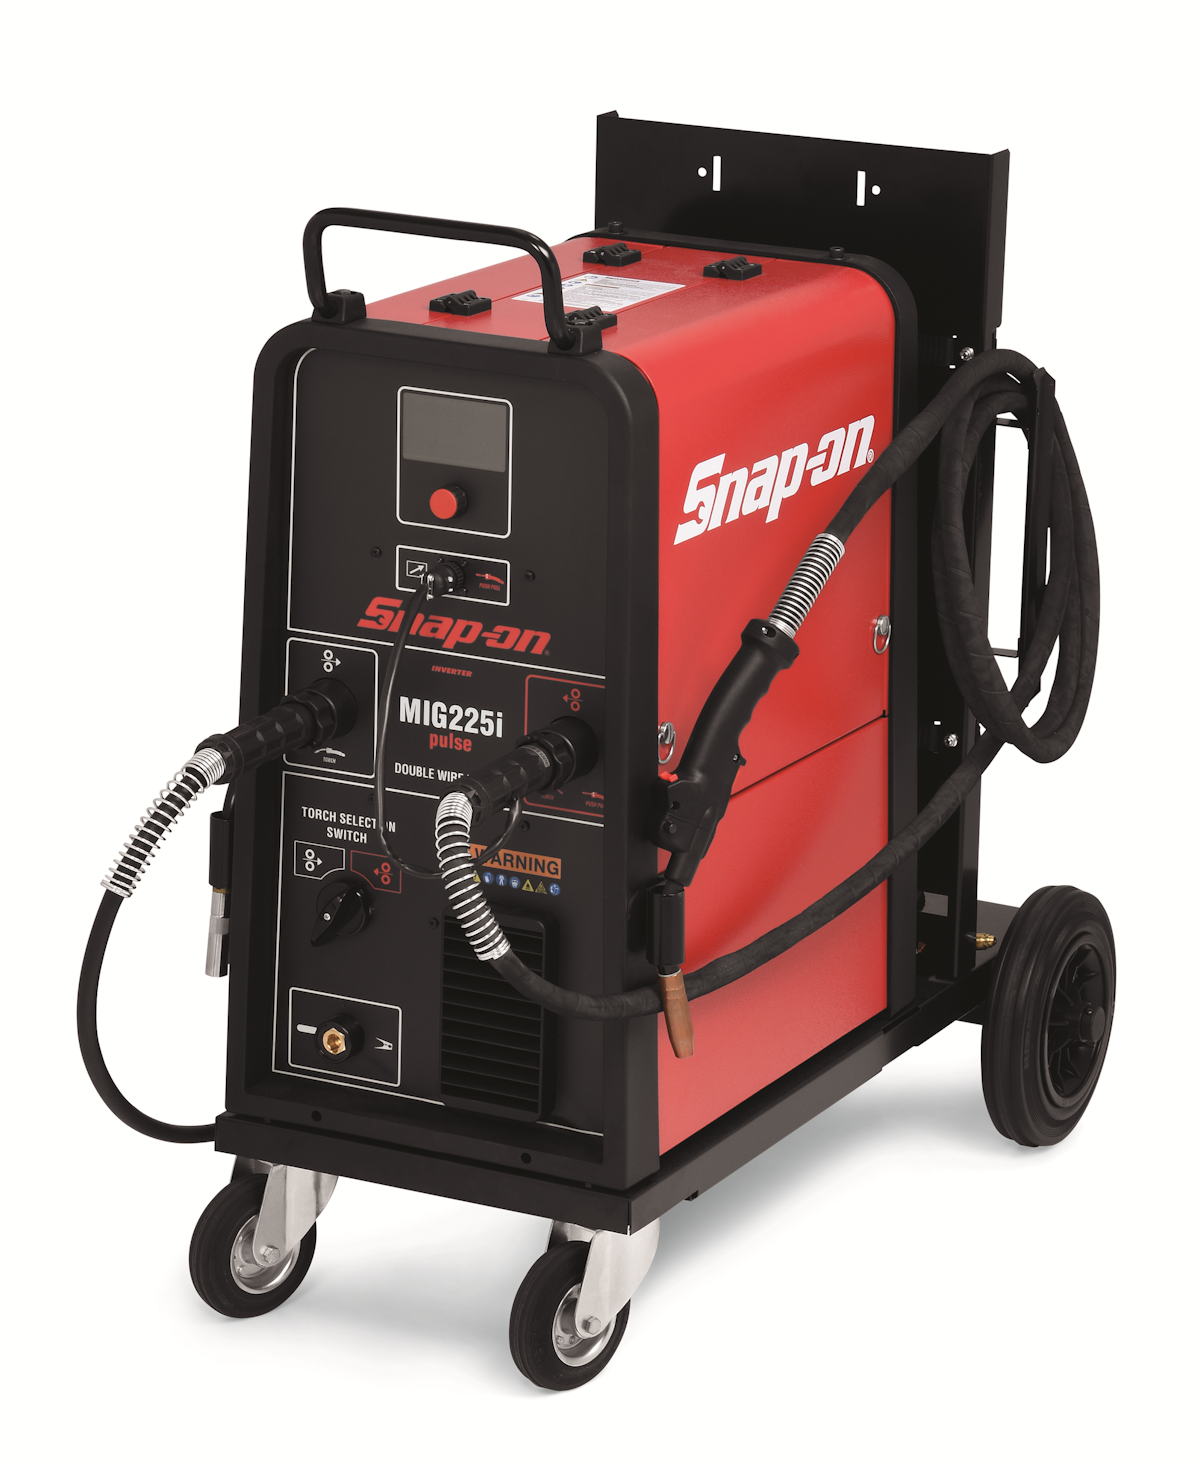 Twin Torch Synergic Pulse MIG Welder, No. MIG225i From: Snap-on Inc ...